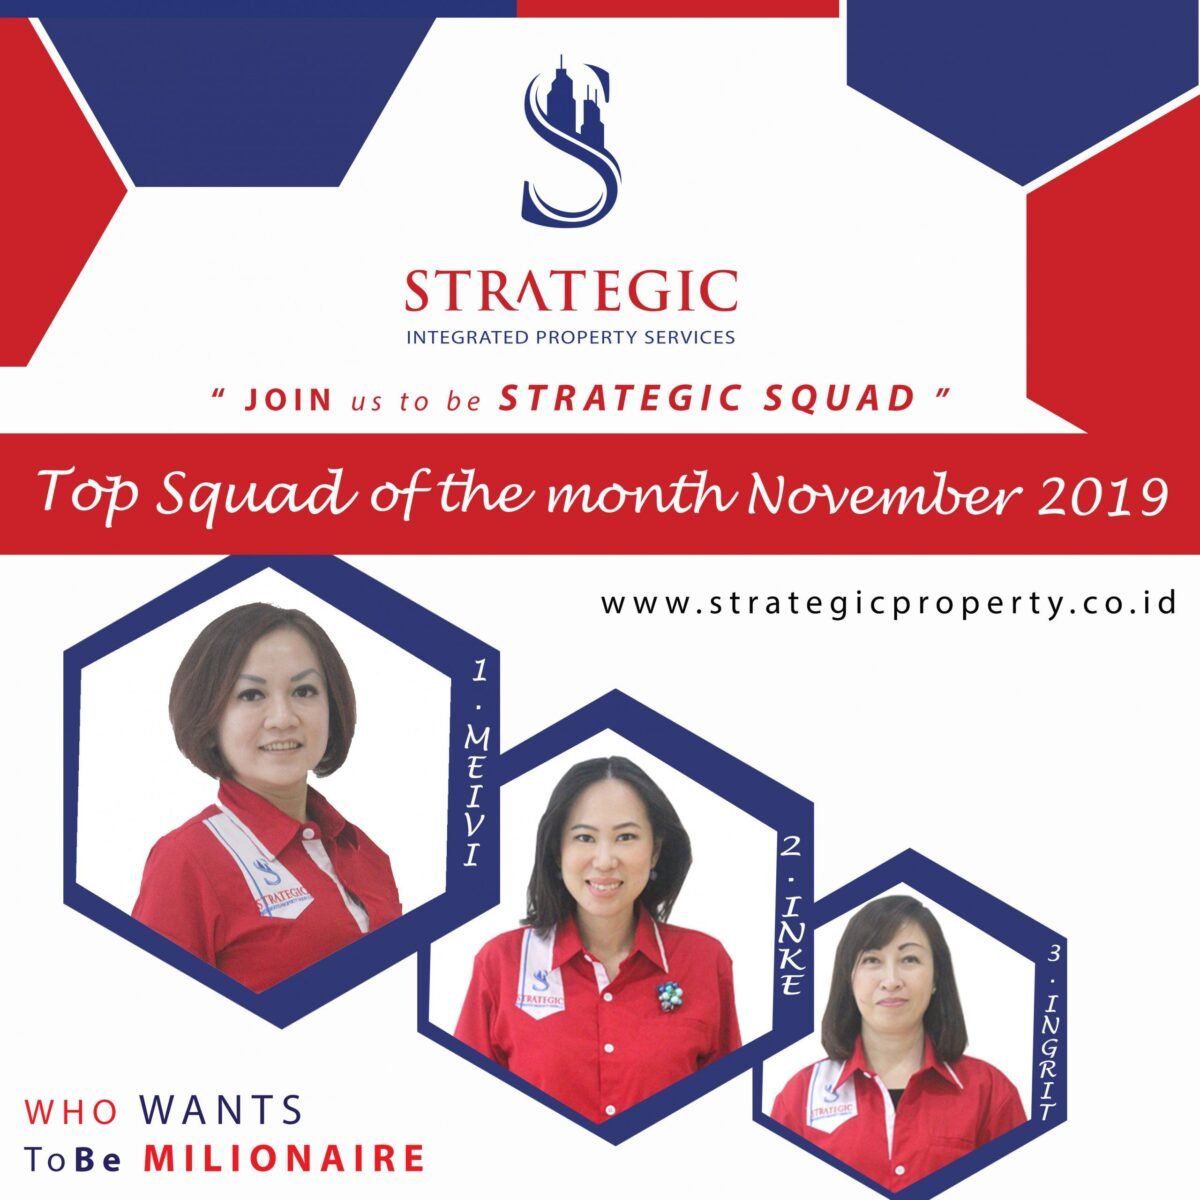 STRATEGIC PROPERTY TOP SQUAD OF THE MONTH NOVEMBER 2019